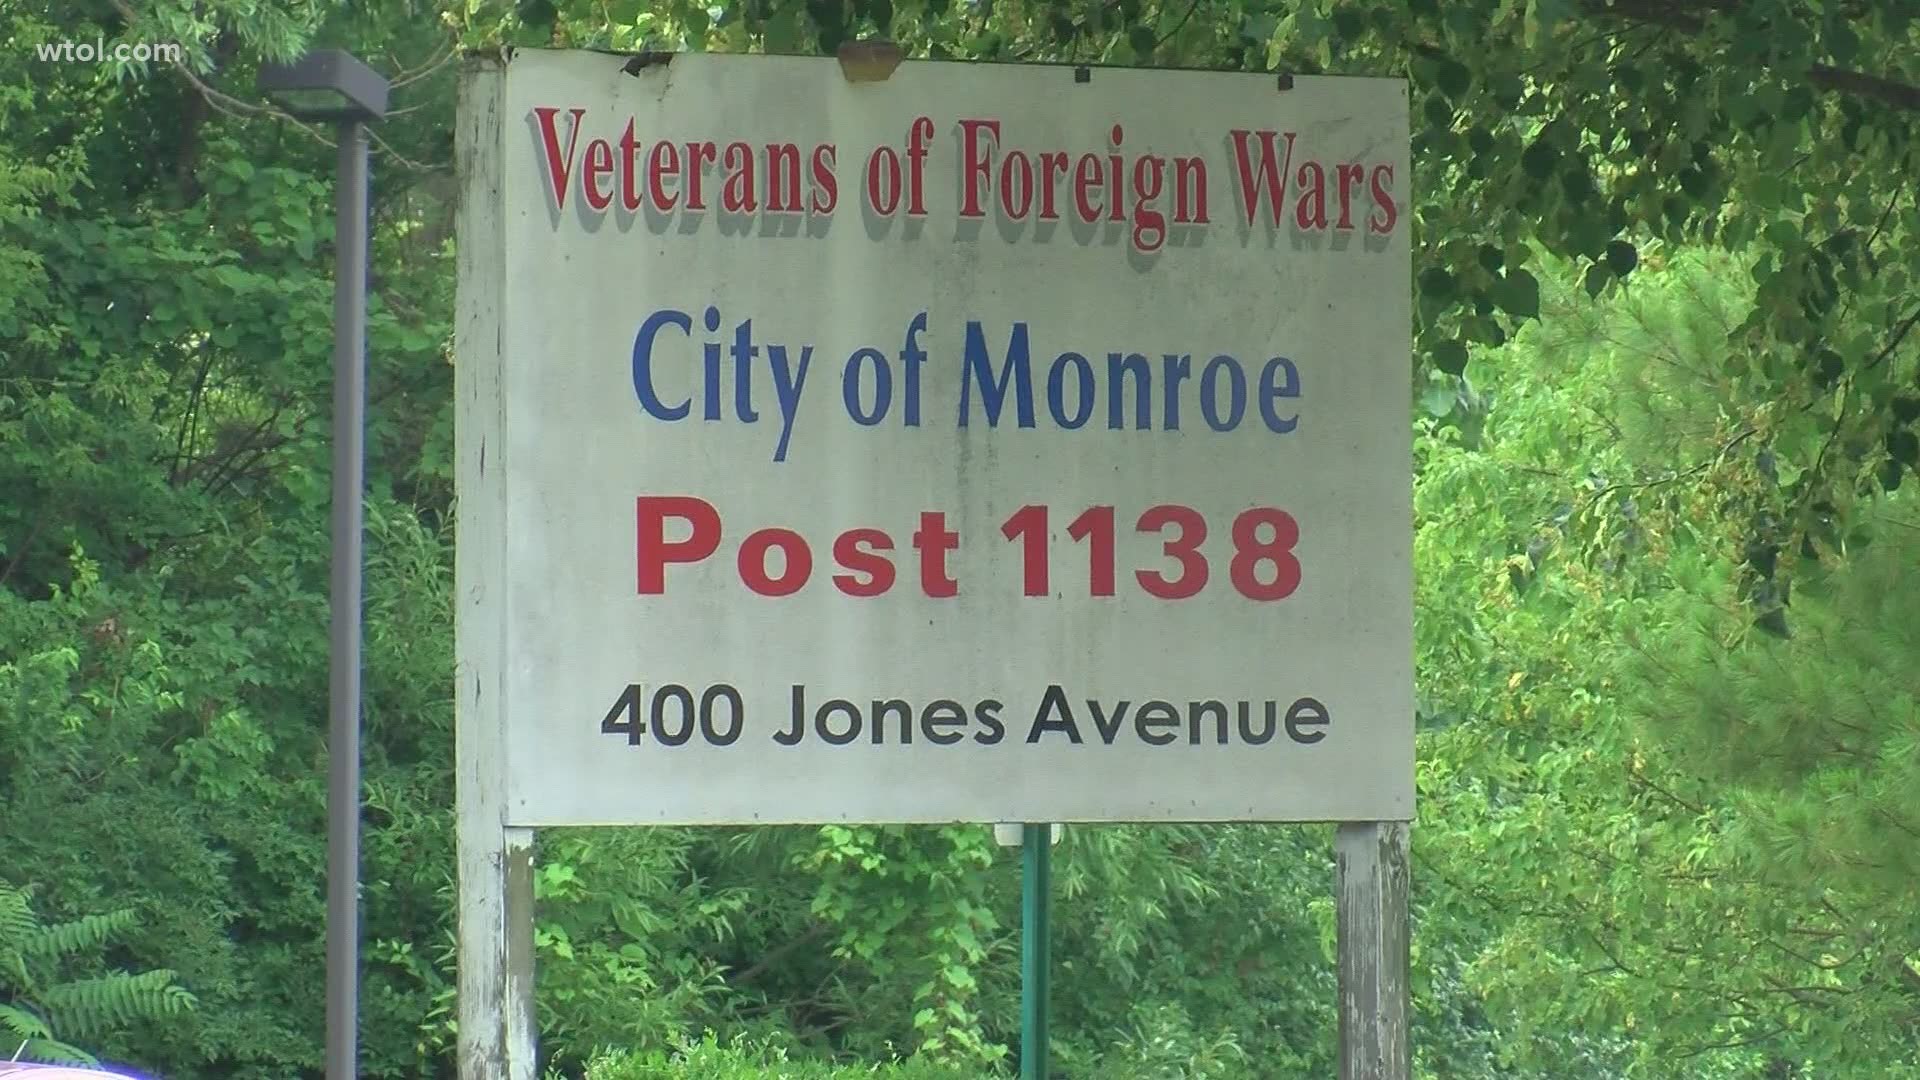 Monroe VFW Post 1138 Commander Alvin Bond got a call asking why American flags that lined the post's entrances were on the ground, or by the dumpster.